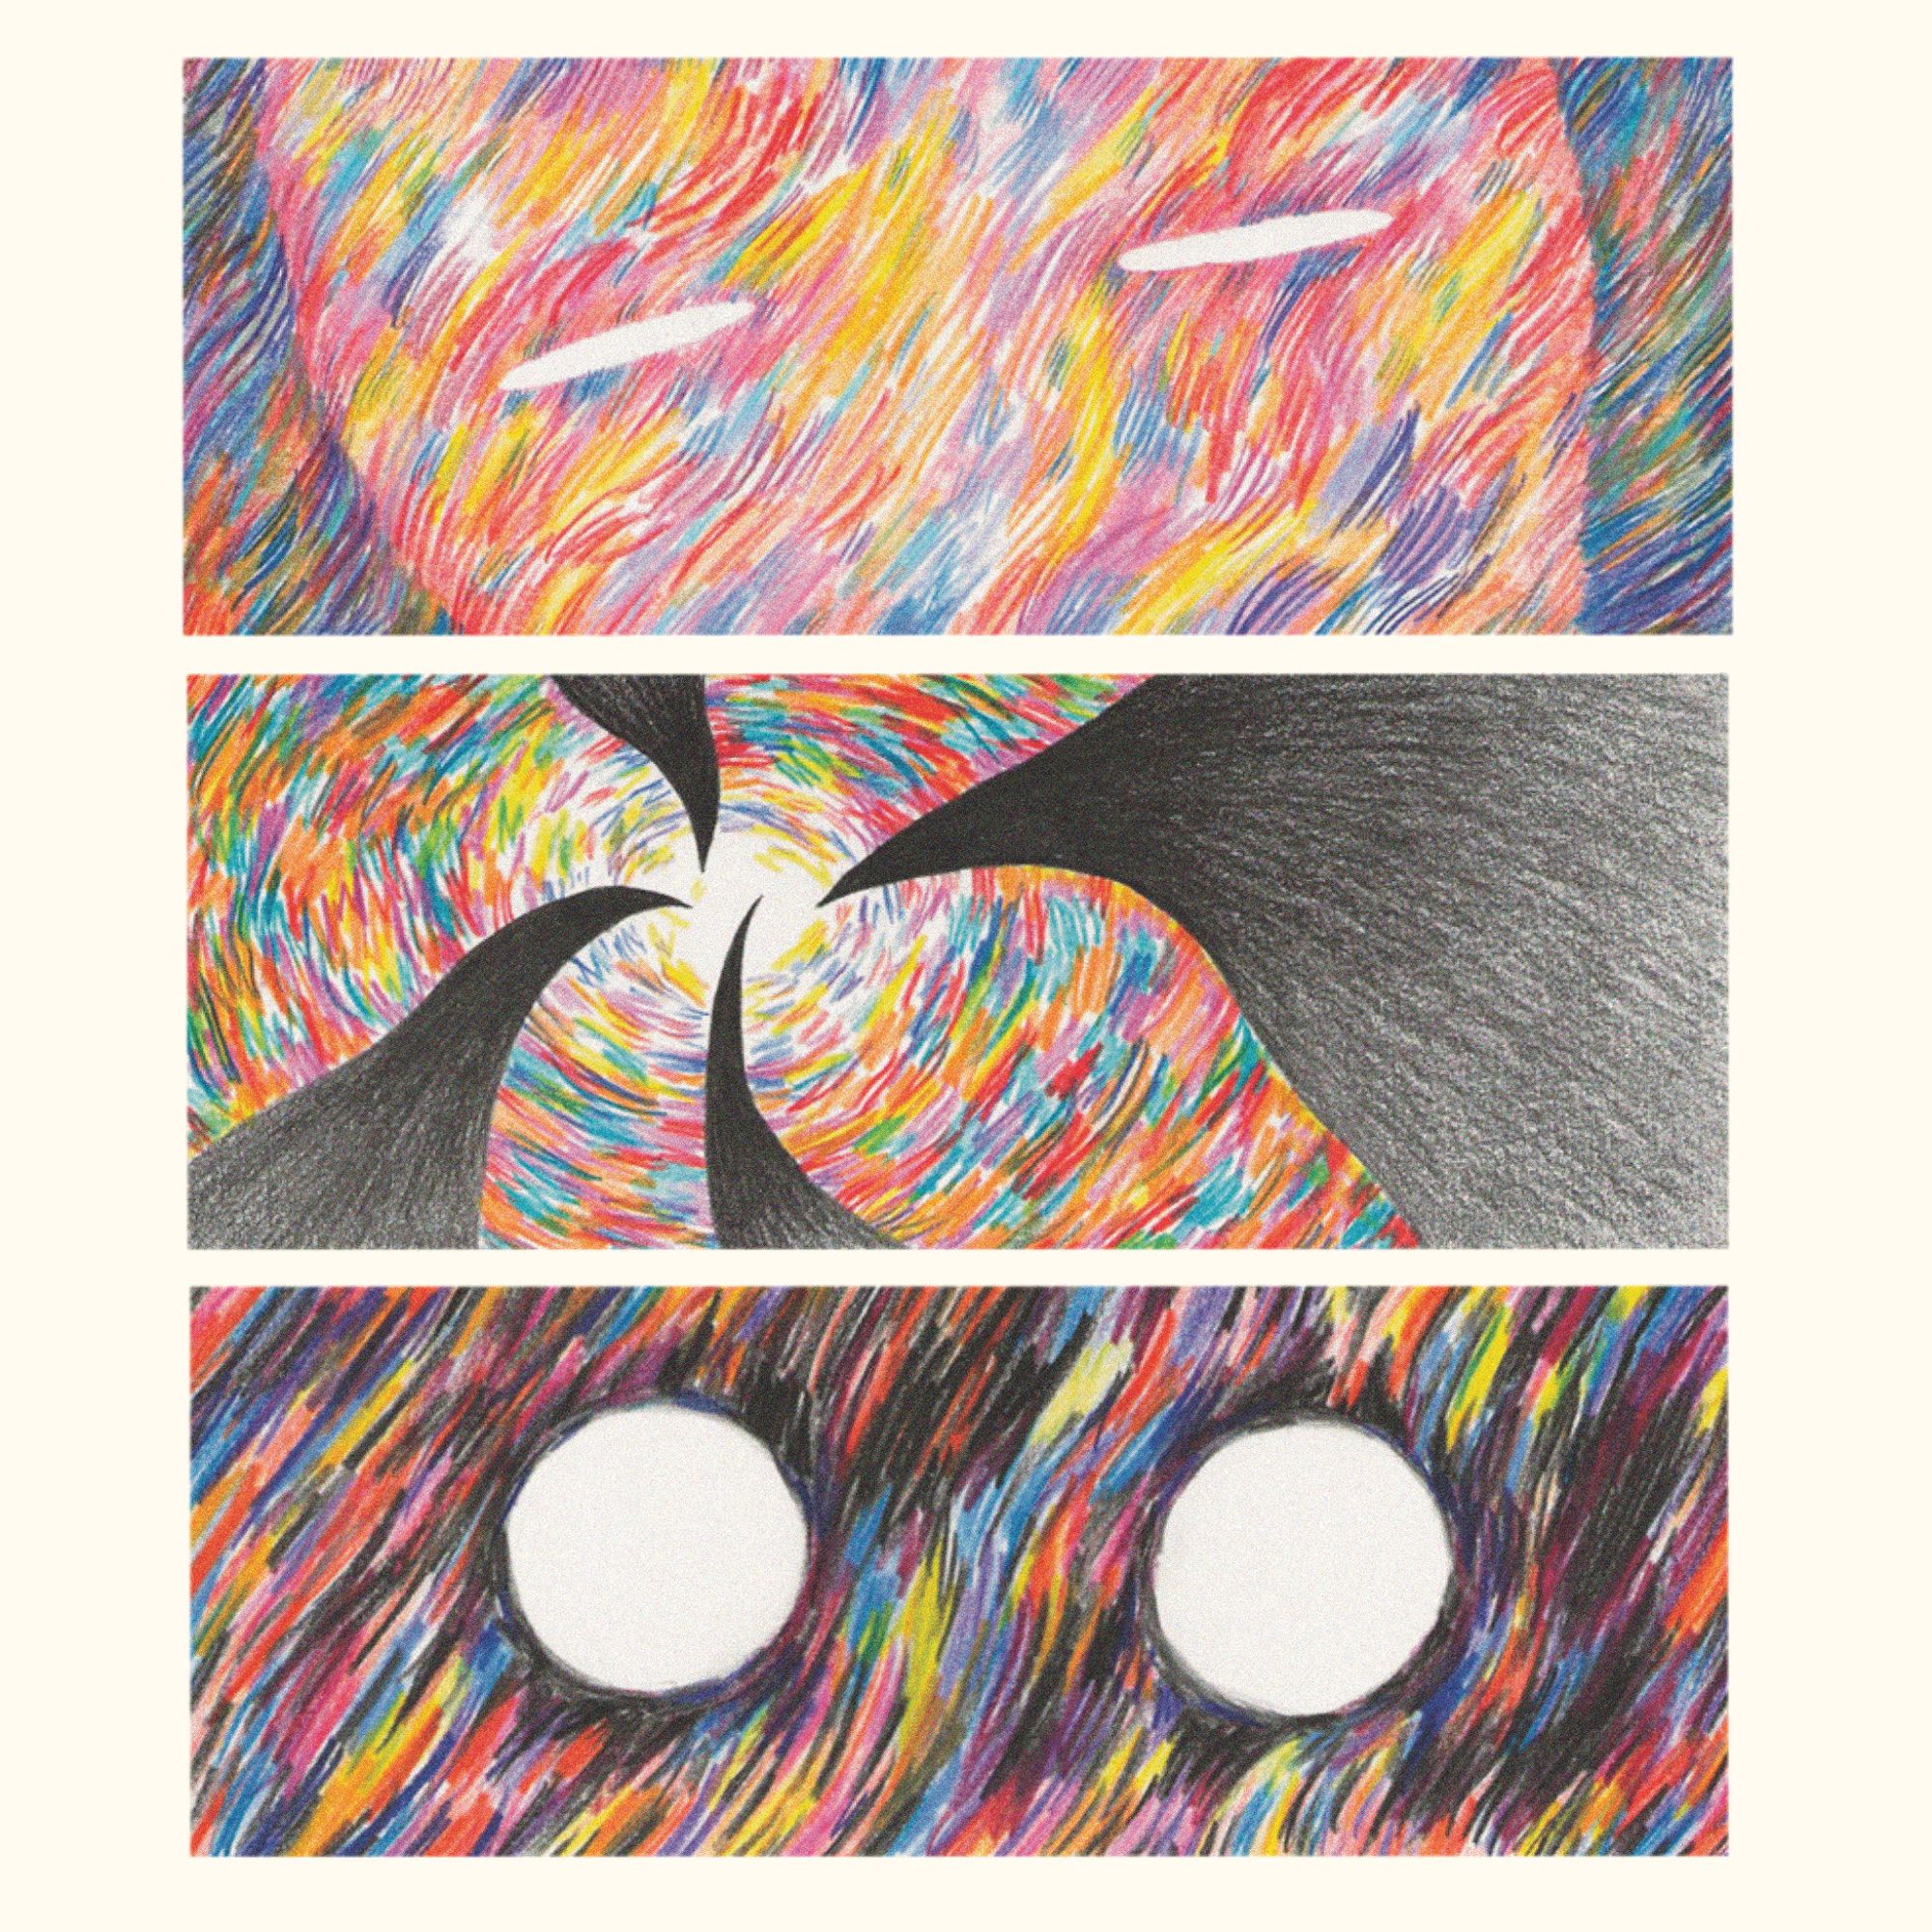 'Dimitri', a short story created with colour pencils